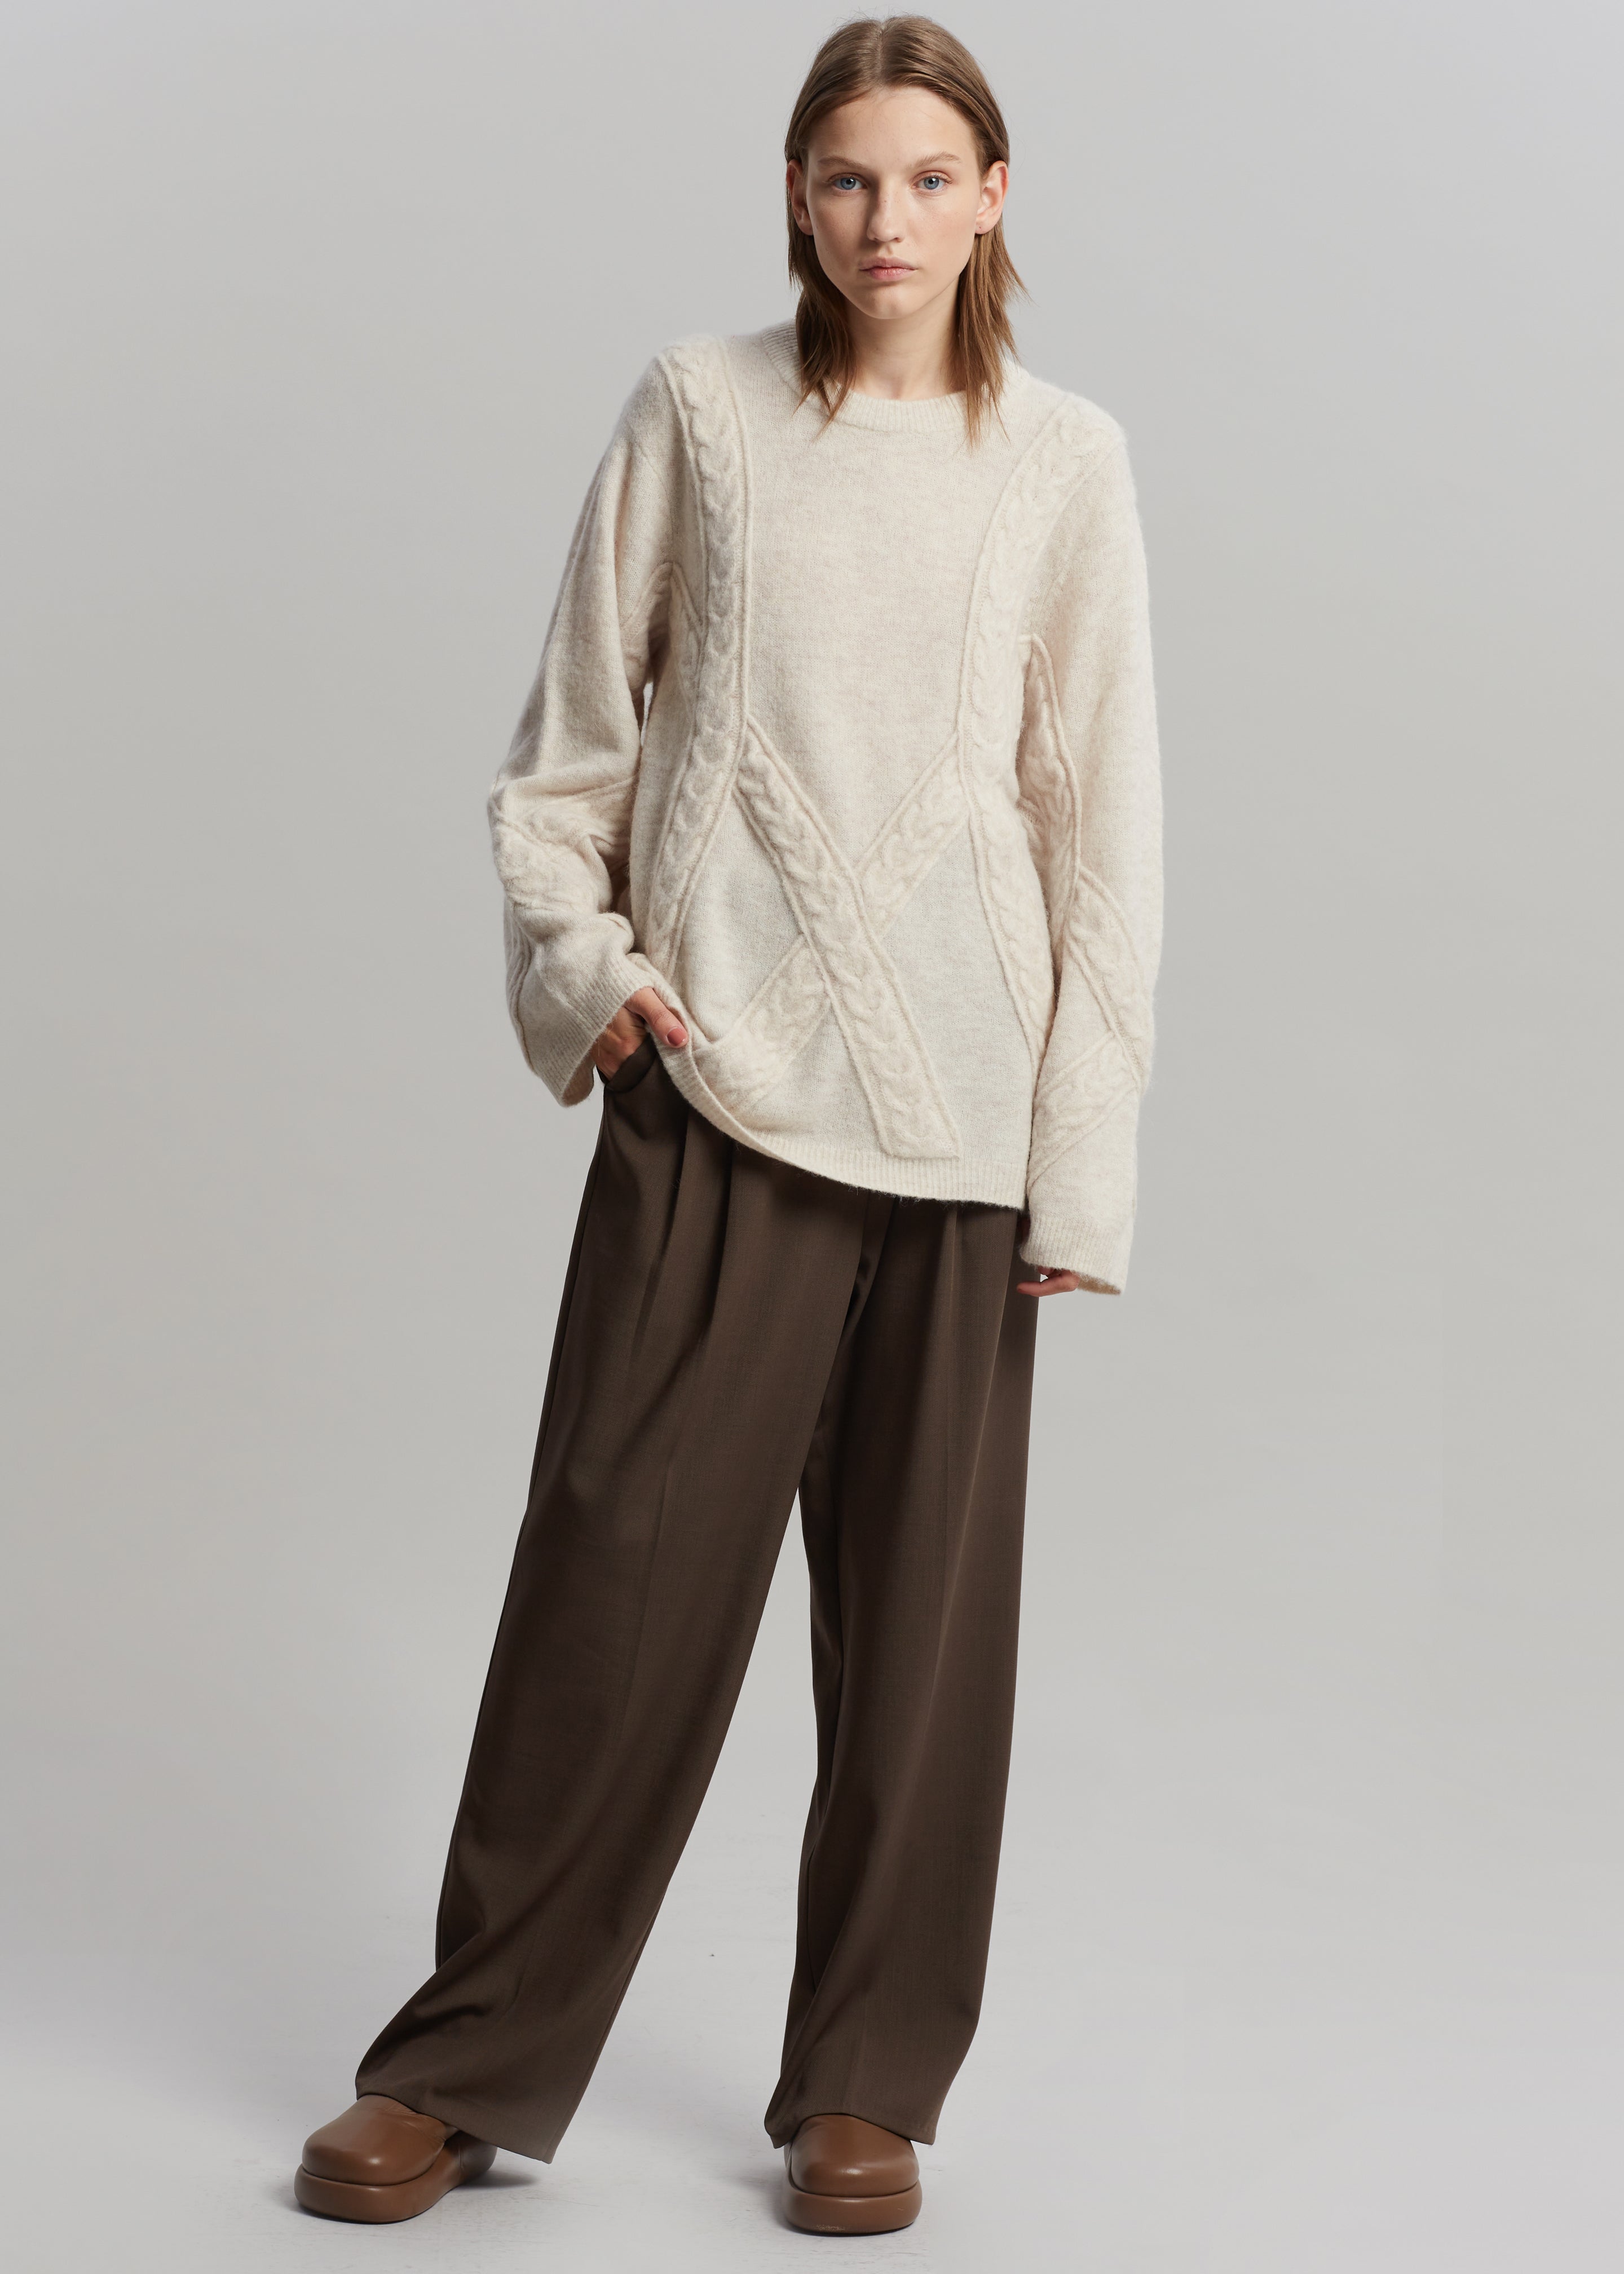 The Garment Courchevel Cable Knit - Oatmeal - 2